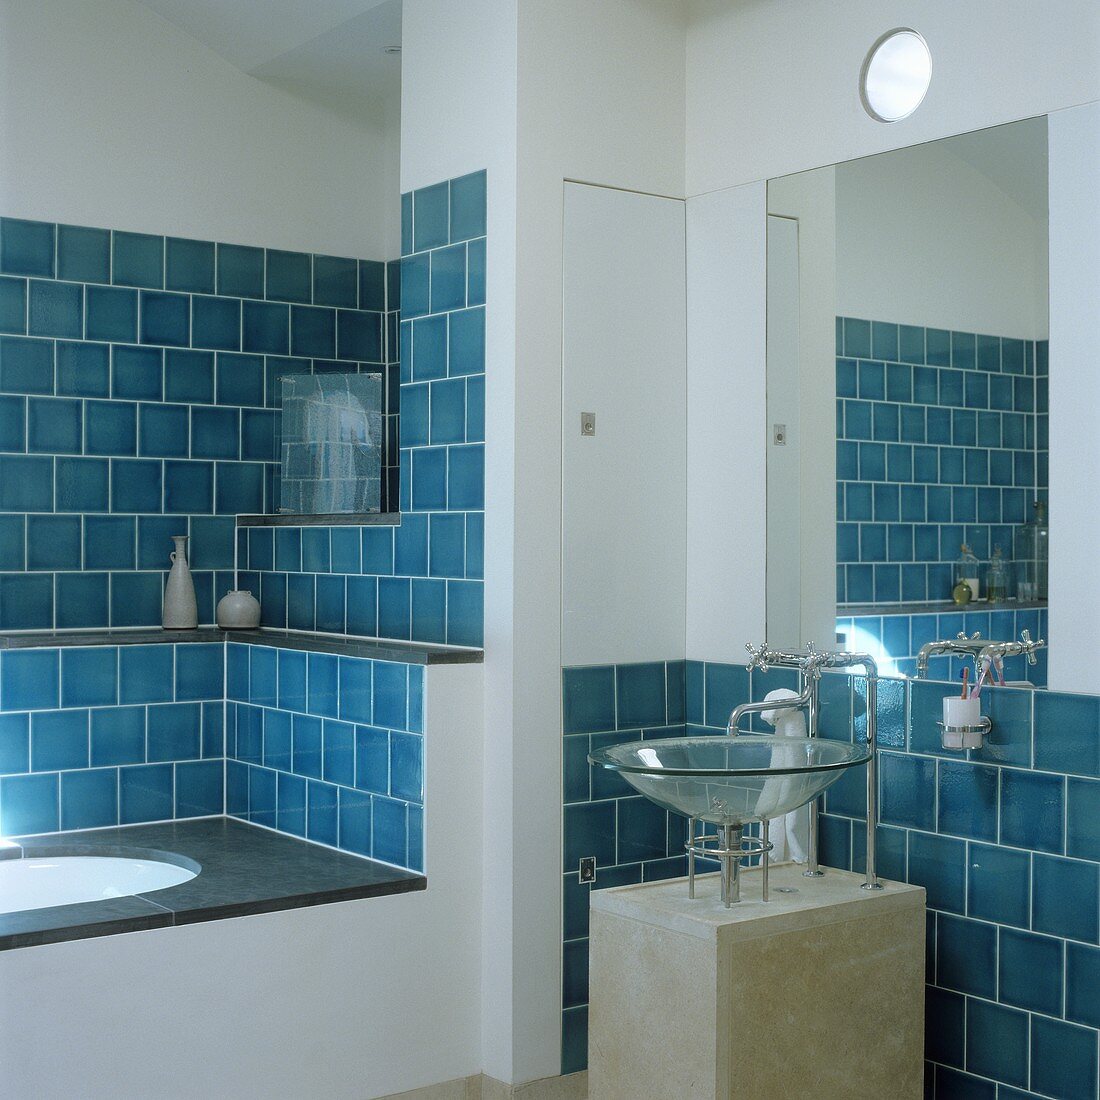 Blue wall tiles in a niche with a built-in bathtub and a glass sink on a concrete pedestal with a mirror above